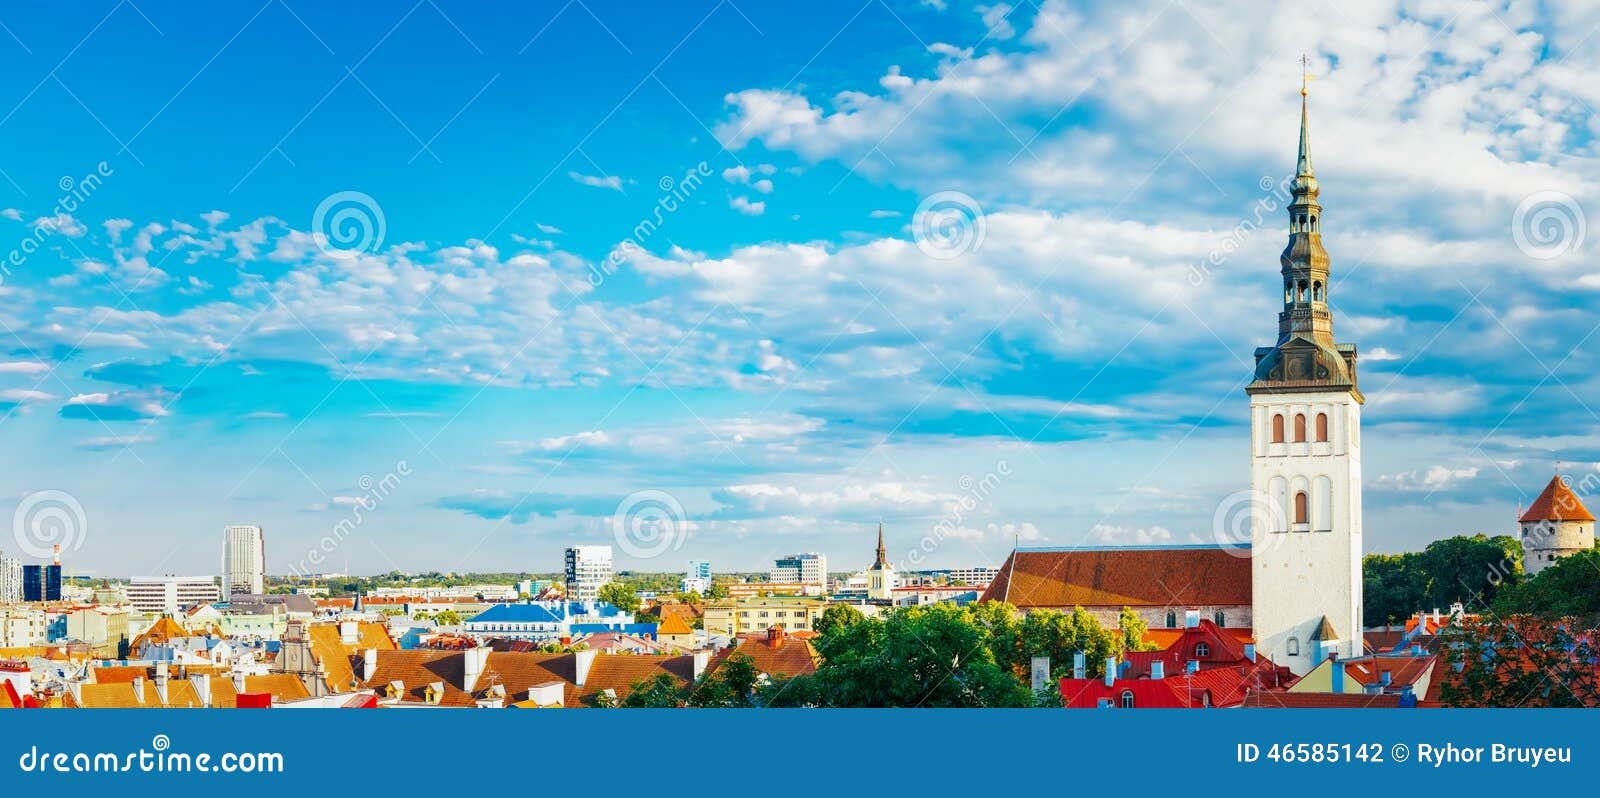 Stock Photo: Panorama Panoramic Scenic View Landscape Old City Town ...